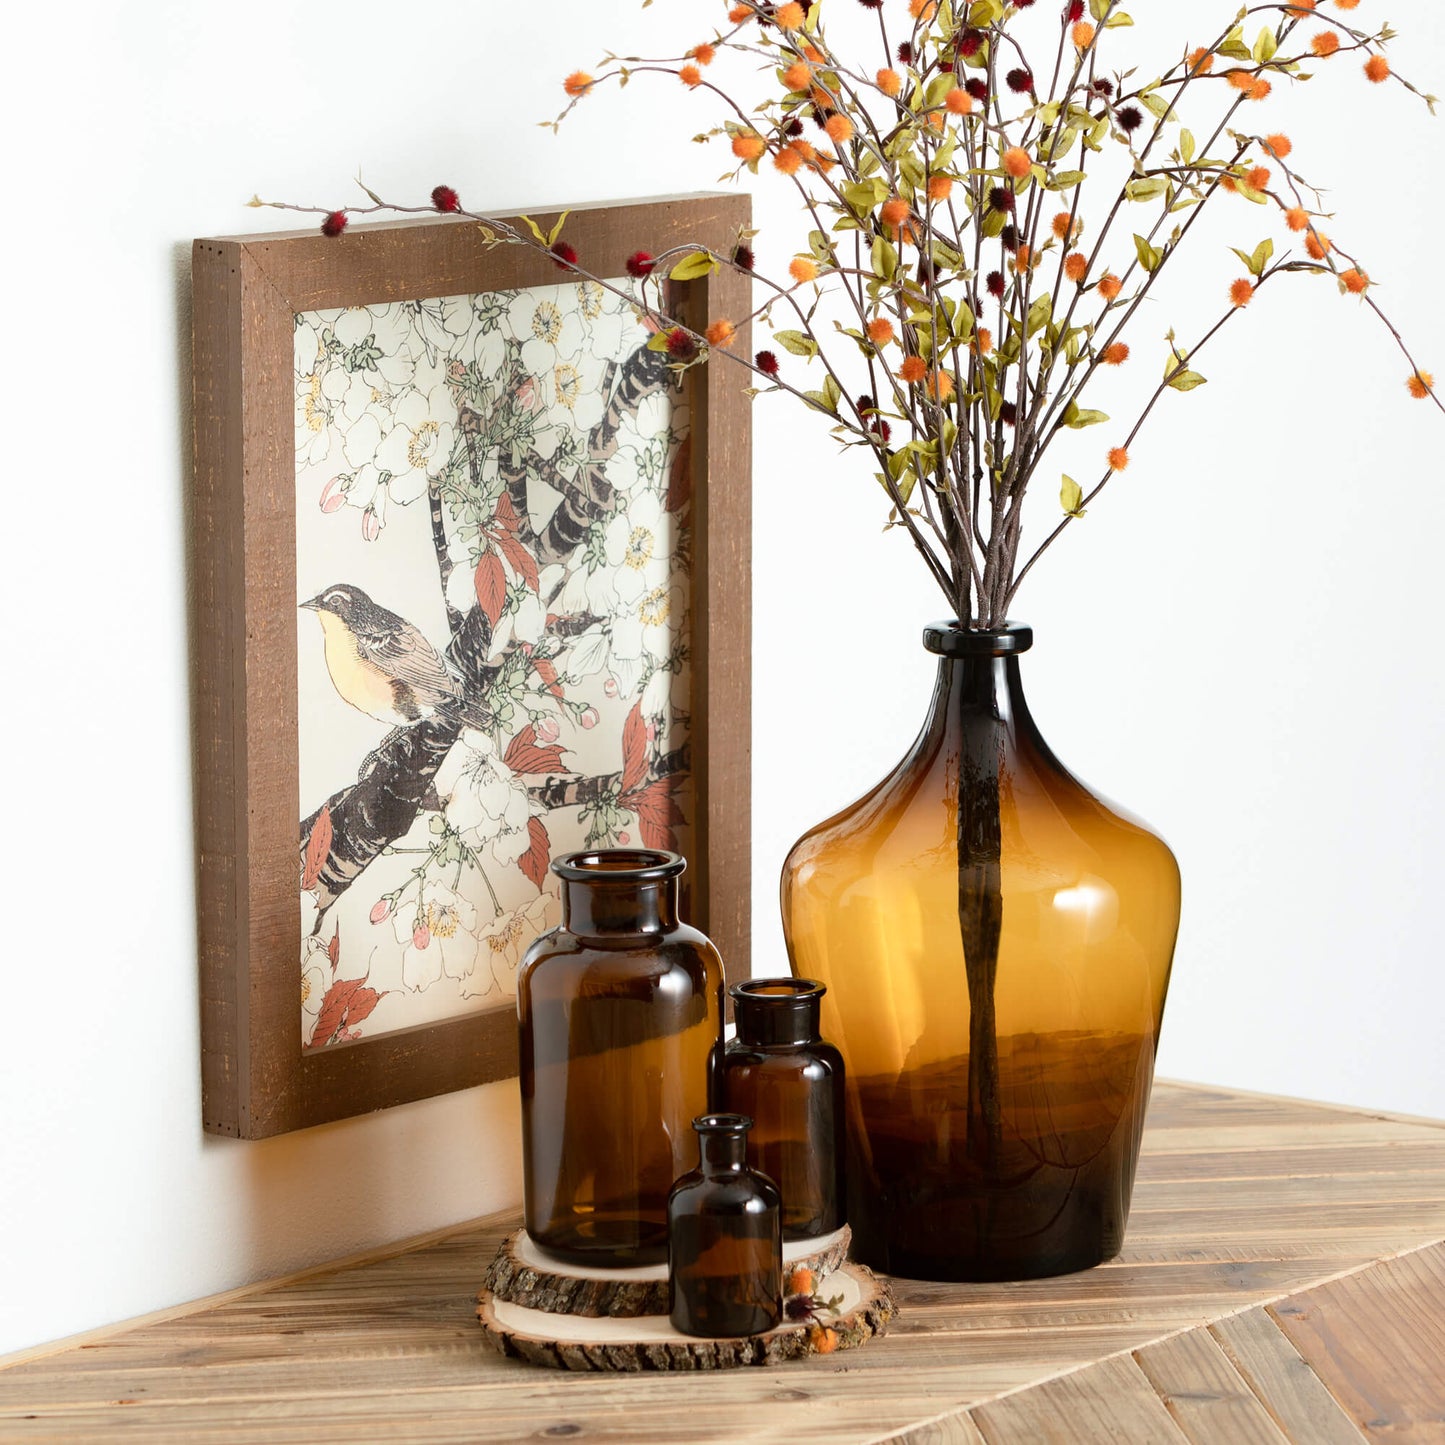 framed bird artwork hanging above a table with amber vases